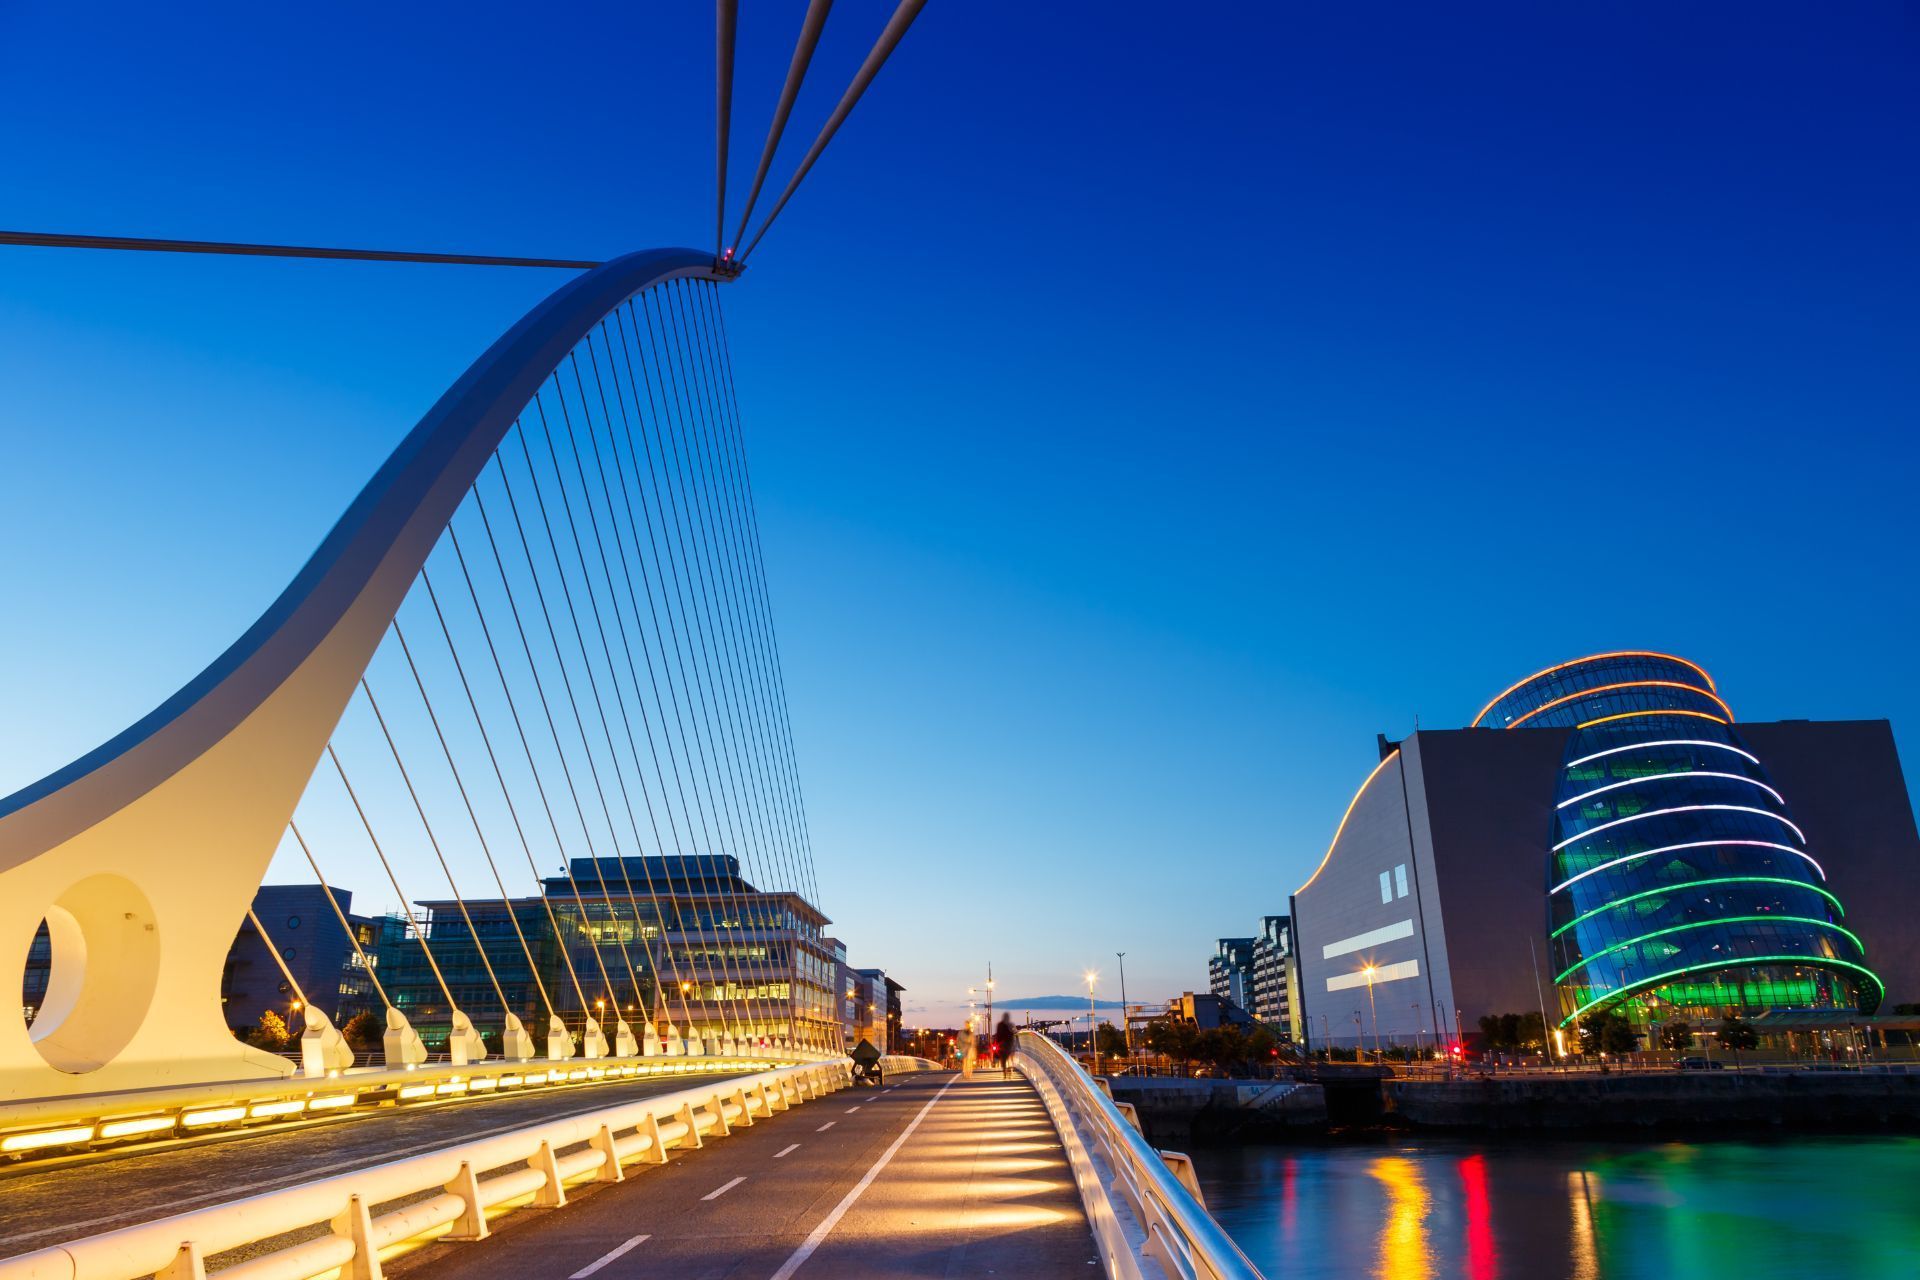 a dublin bridge over a body of water with buildings in the background .